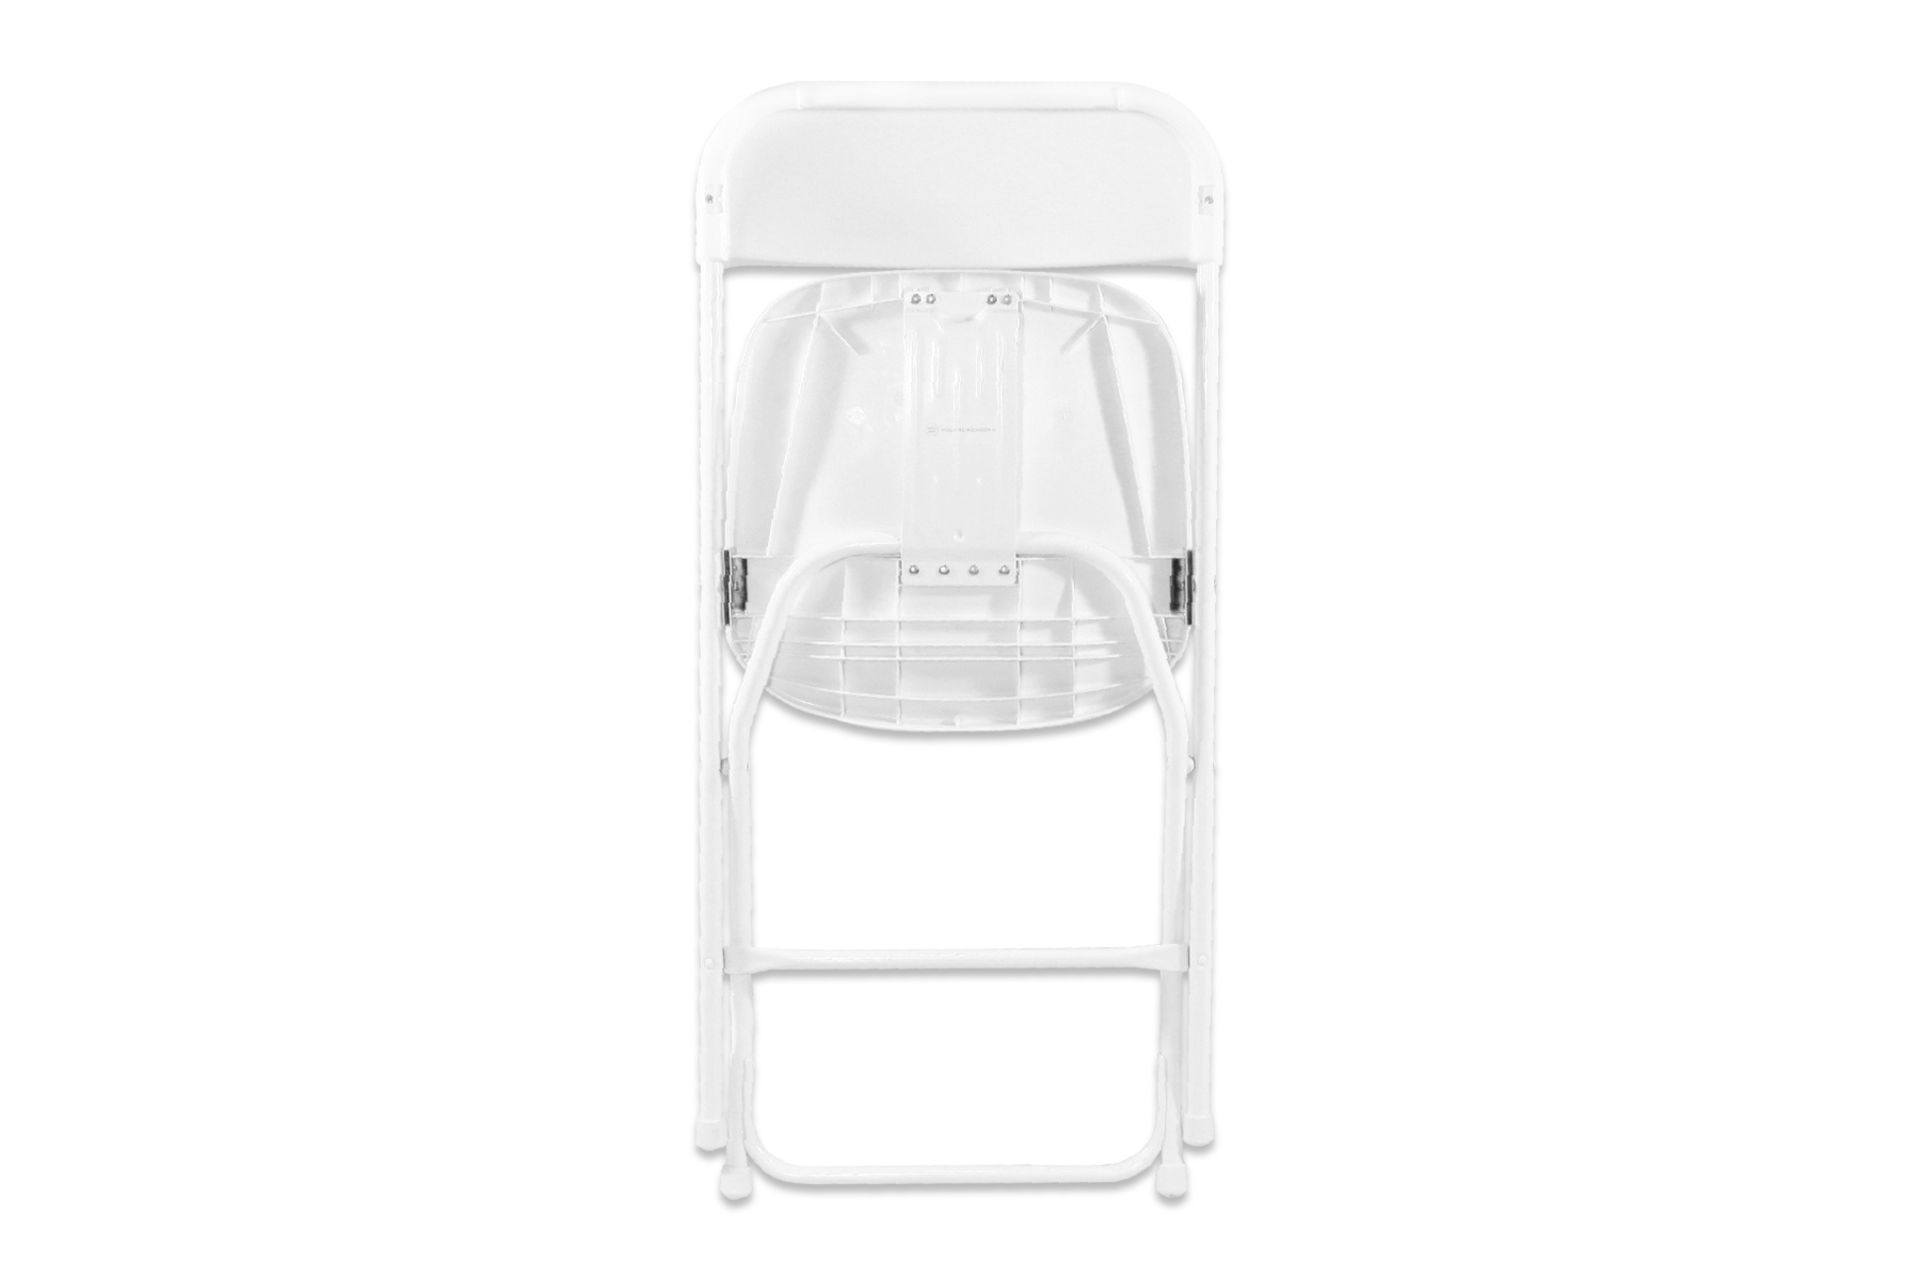 V *TRADE QTY* Grade A Folding Plastic Chair - White X180 YOUR BID PRICE TO BE MULTIPLIED BY ONE - Image 4 of 6